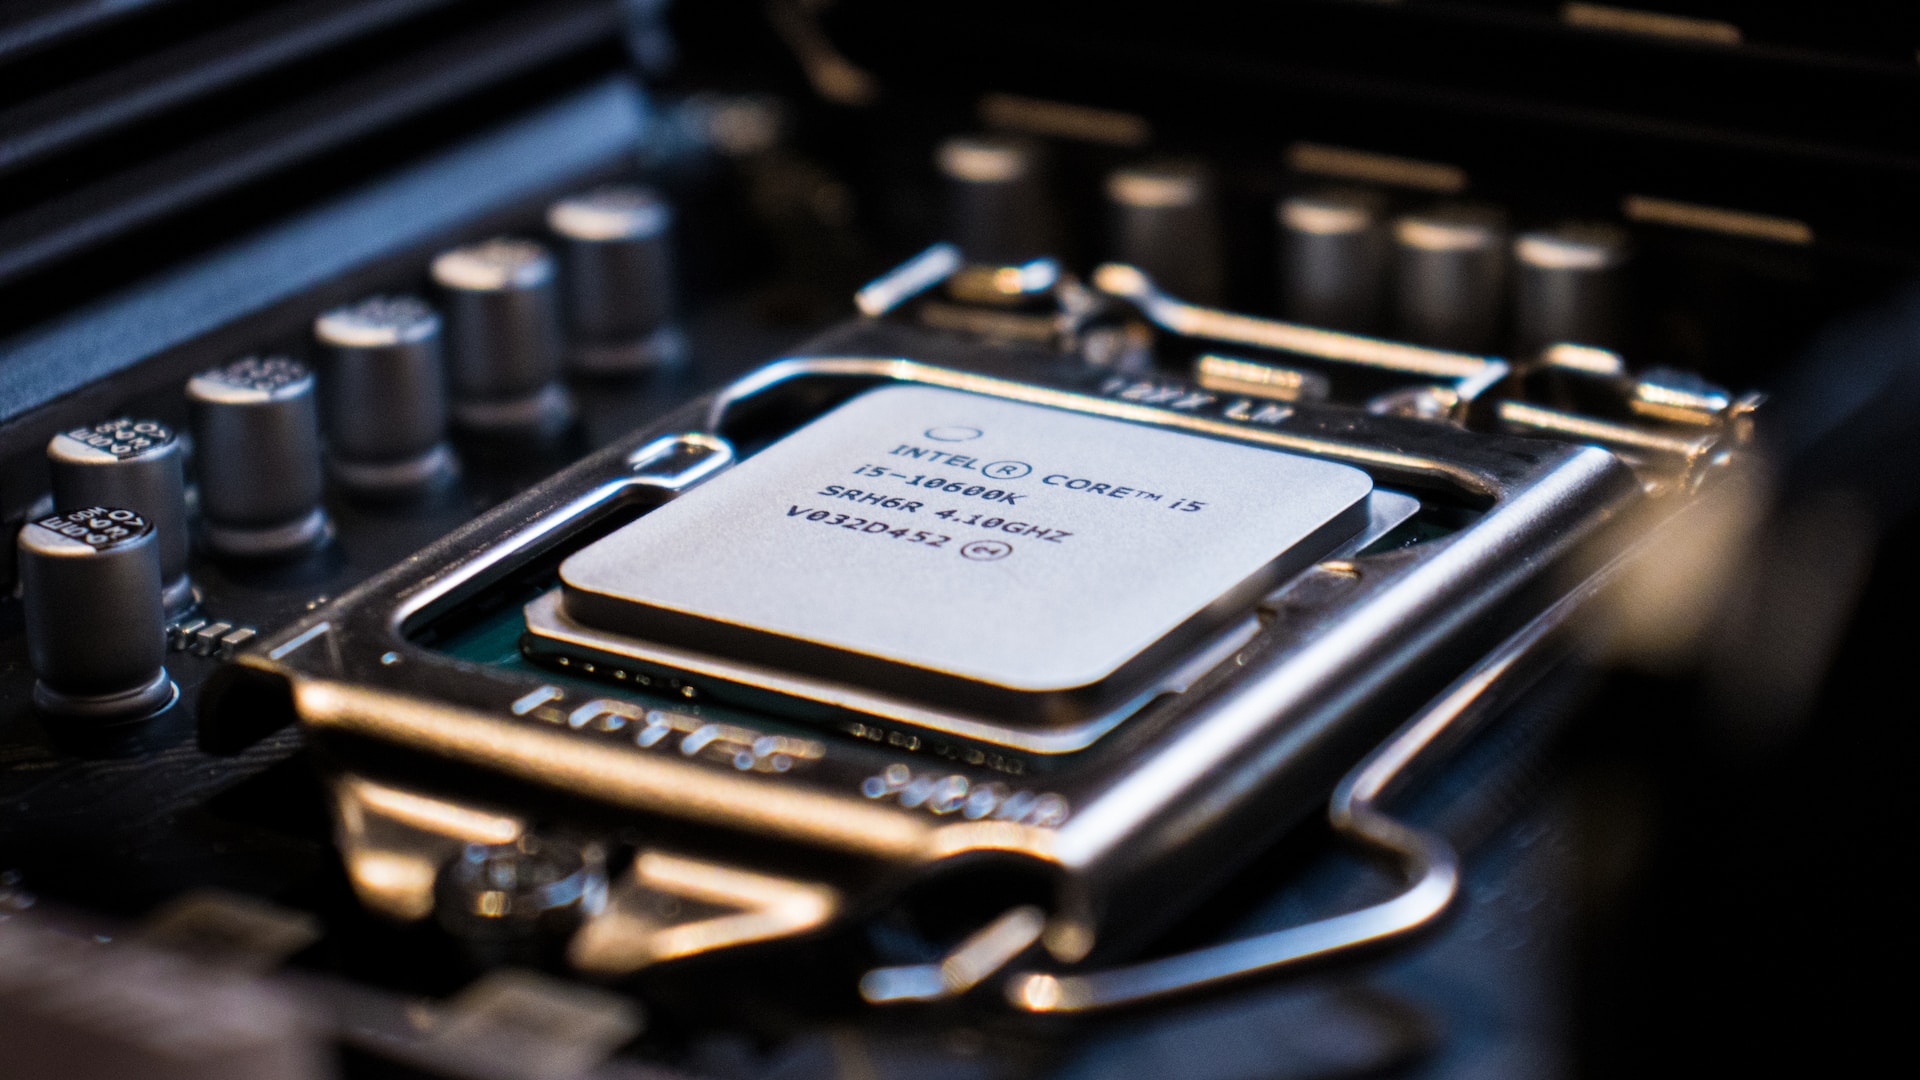 A Guide To Overclocking Your CPU - Pros And Cons